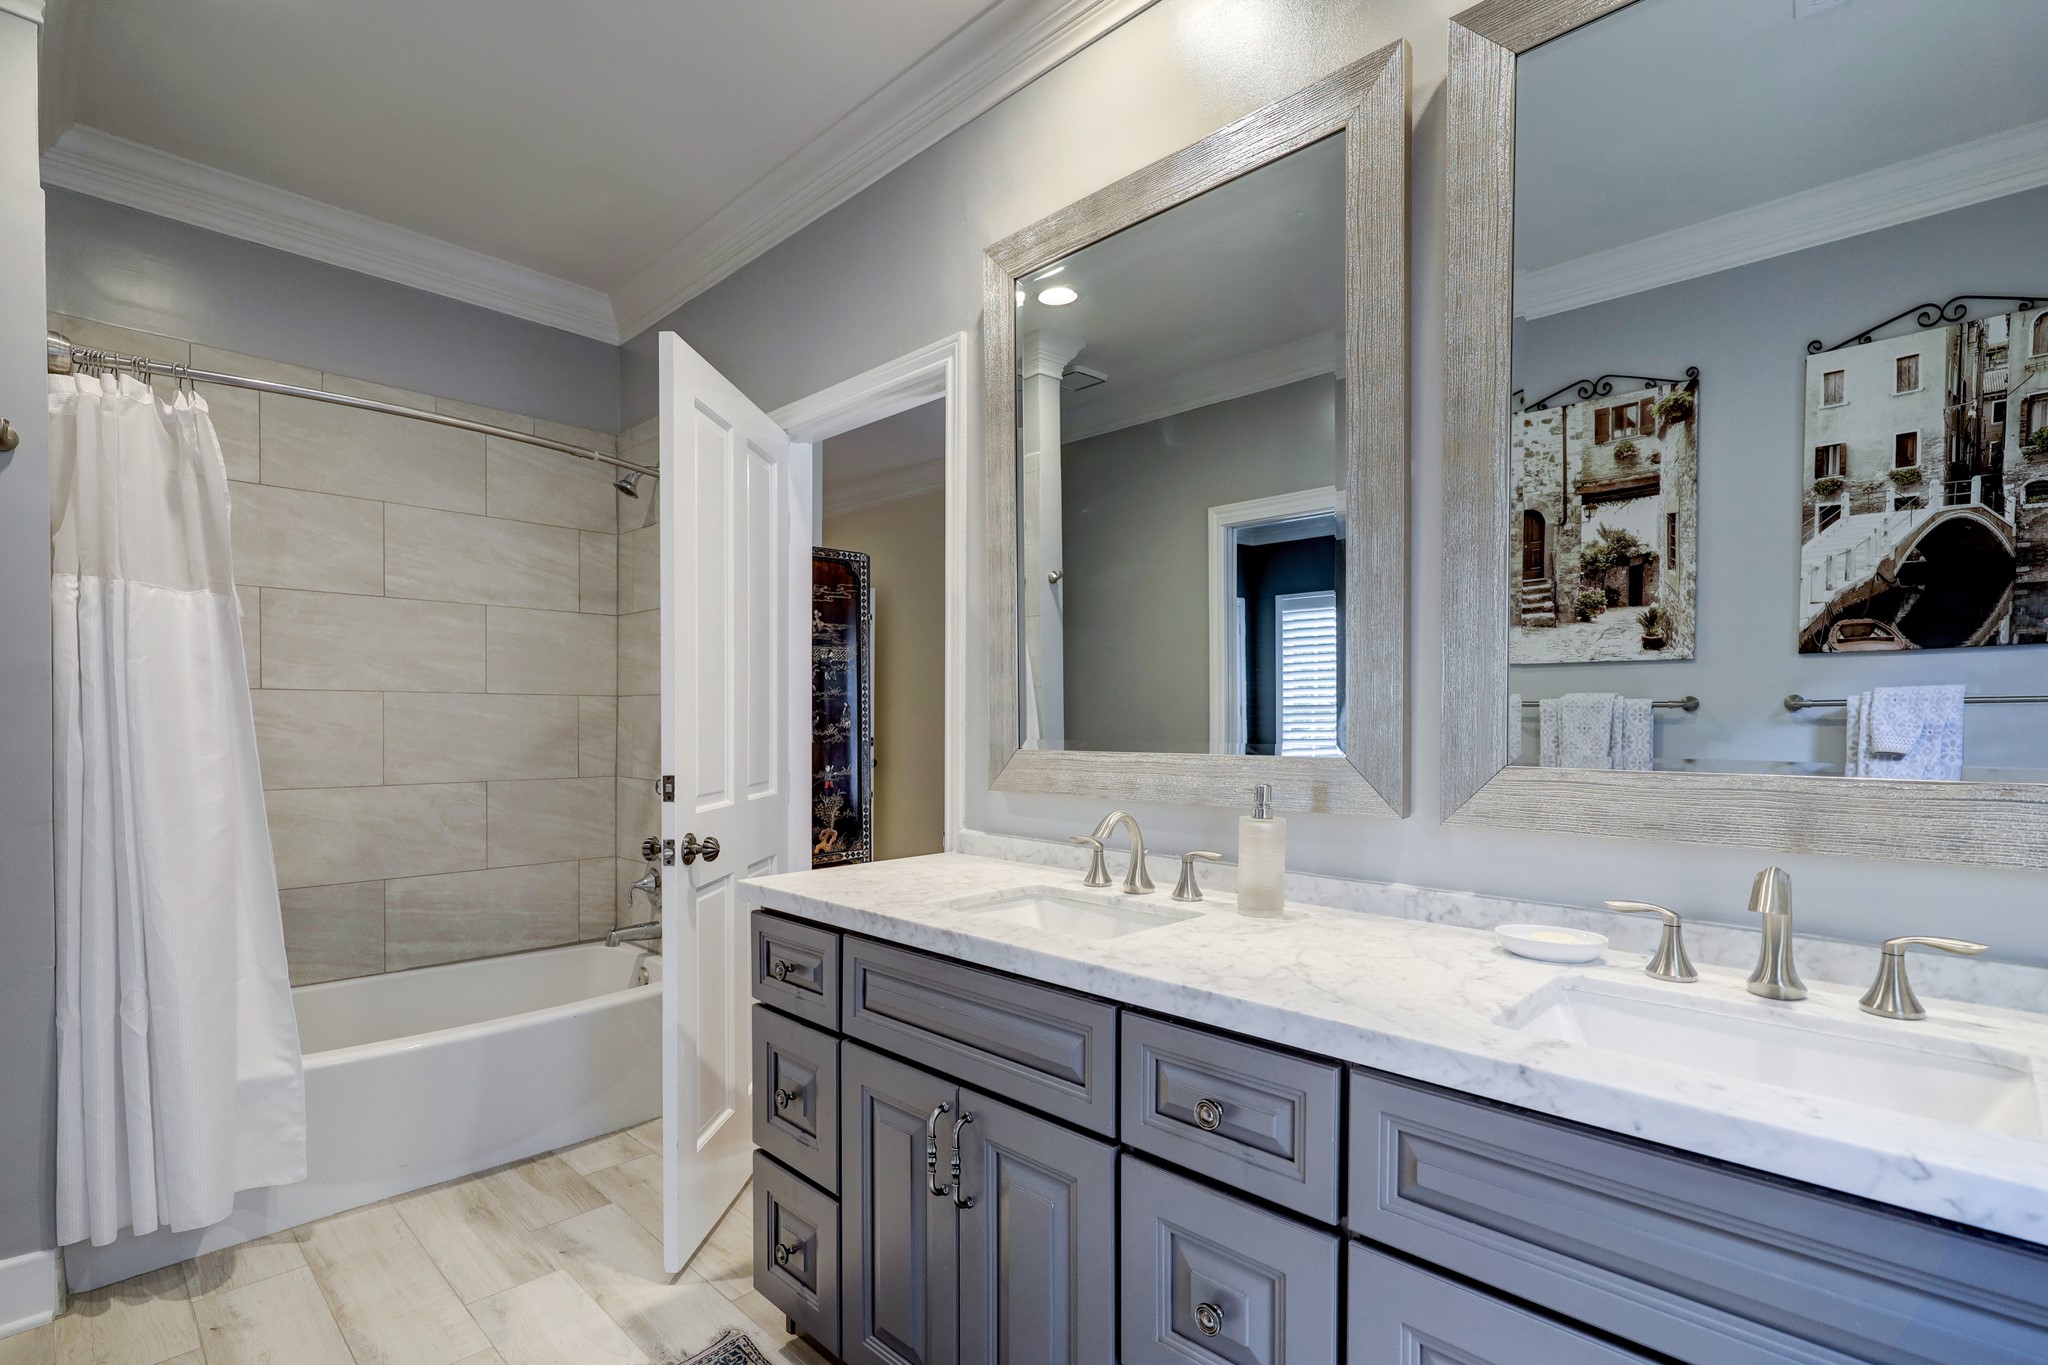 Completely remodeled, the secondary bath now features dual sinks, designer mirrors, on-trend tile and neutral colors.